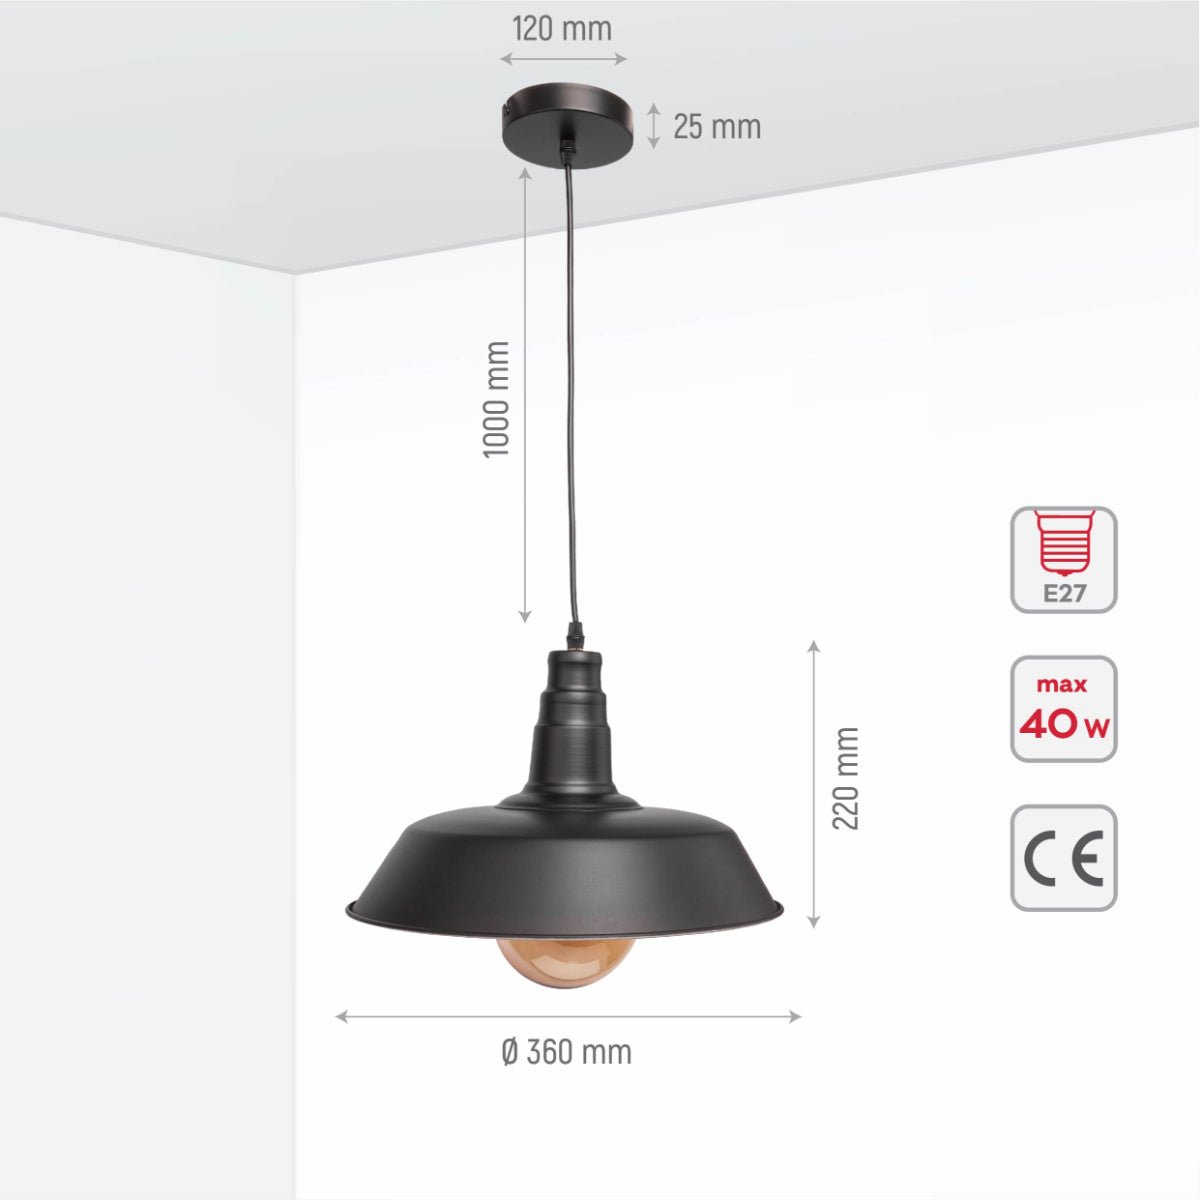 Size and specs of Black-White Metal Step Pendant Ceiling Light with E27 | TEKLED 150-15040